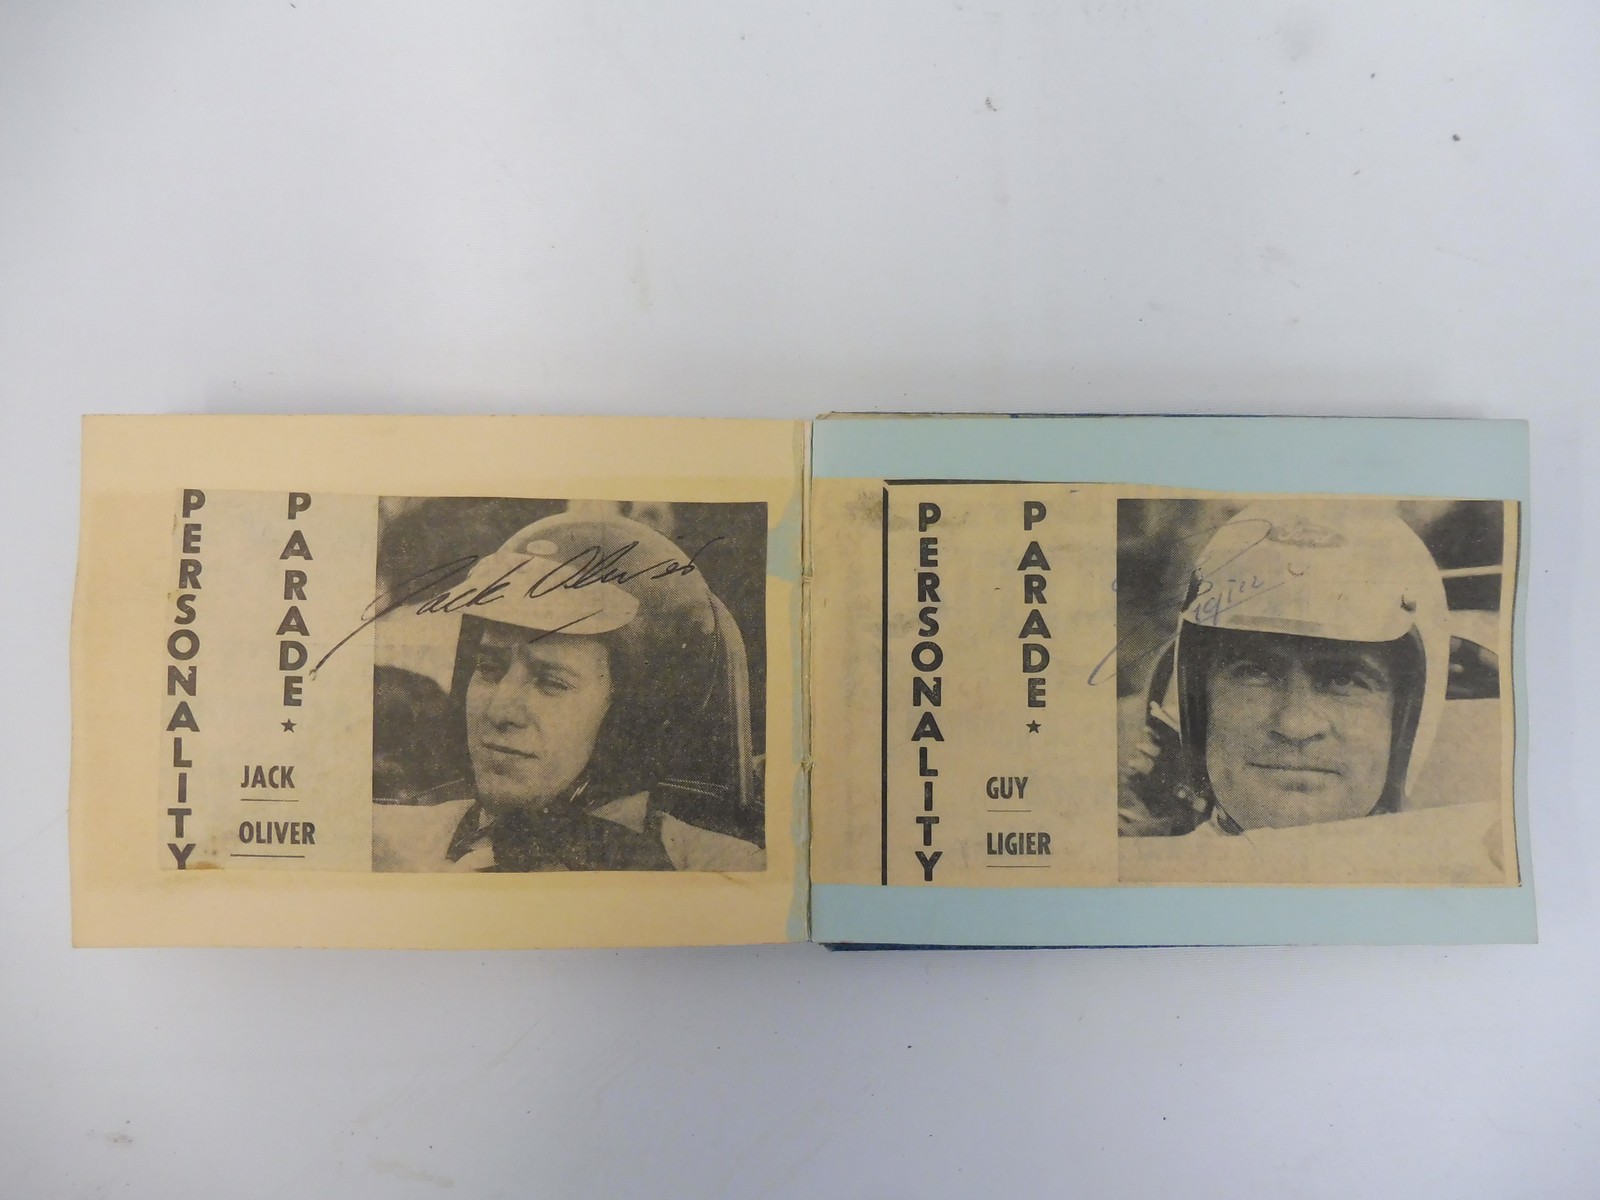 Two autograph albums containing an assortment of racing driver signatures including Jim Clark, - Image 6 of 12